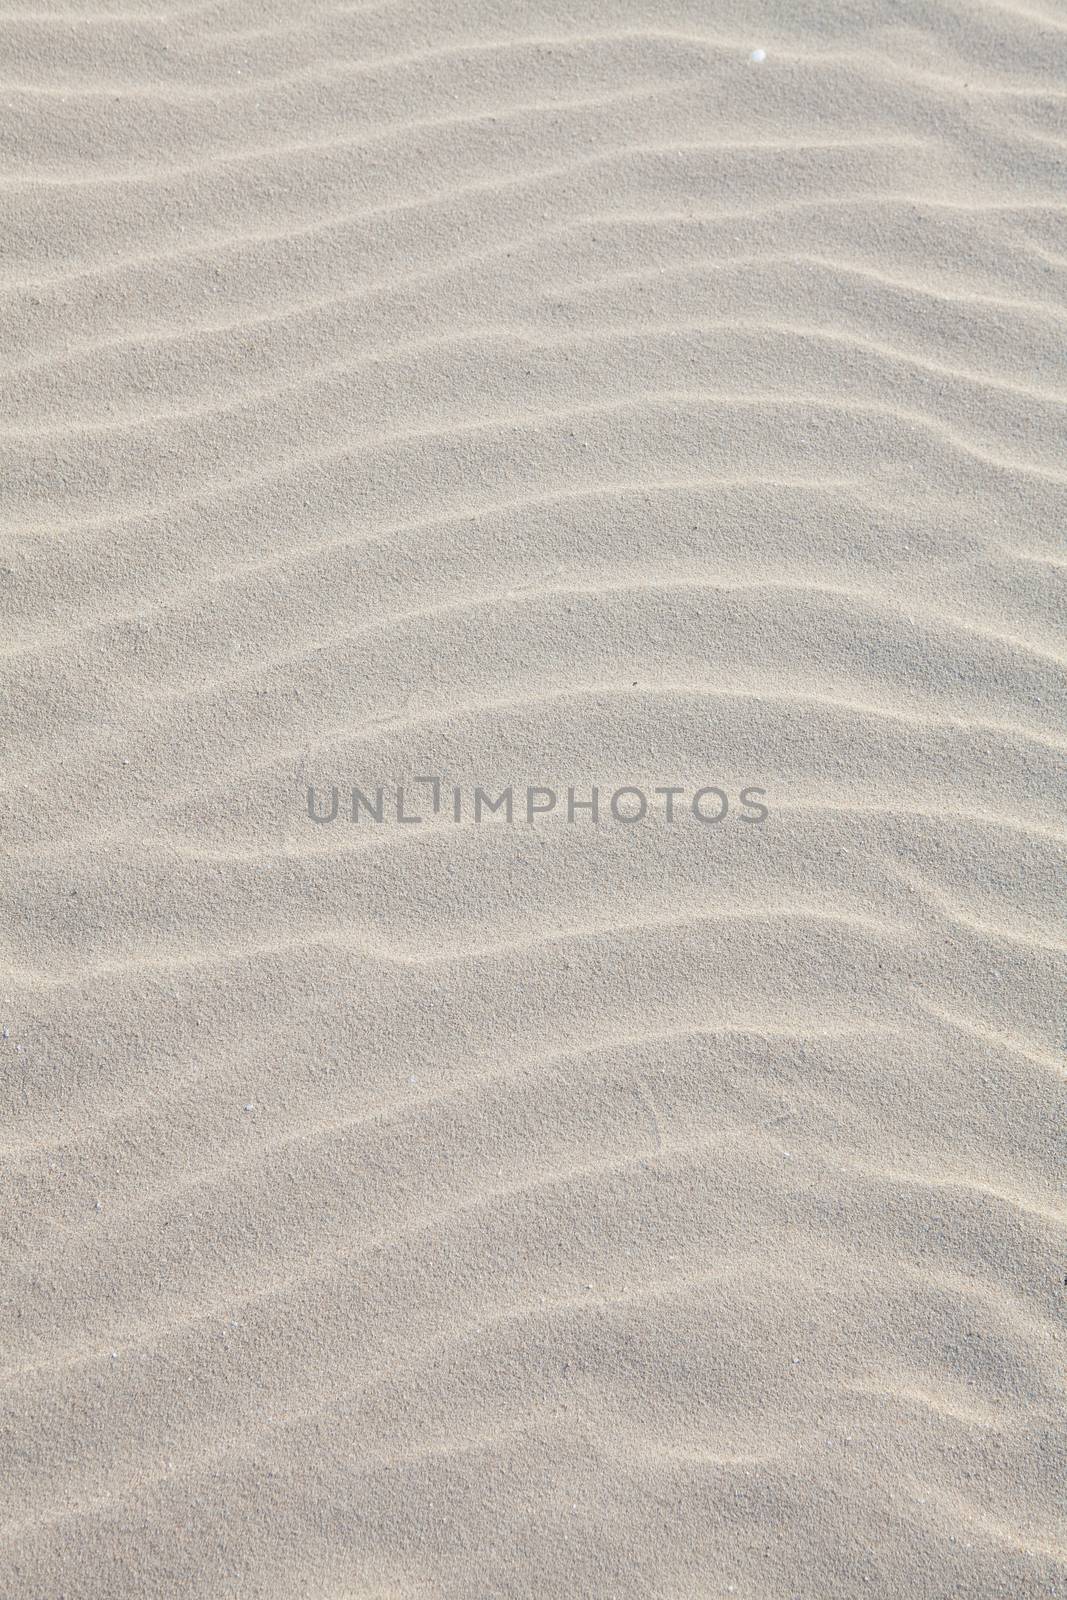 White sand beach, the waves,blurred texture backgrounds from sand